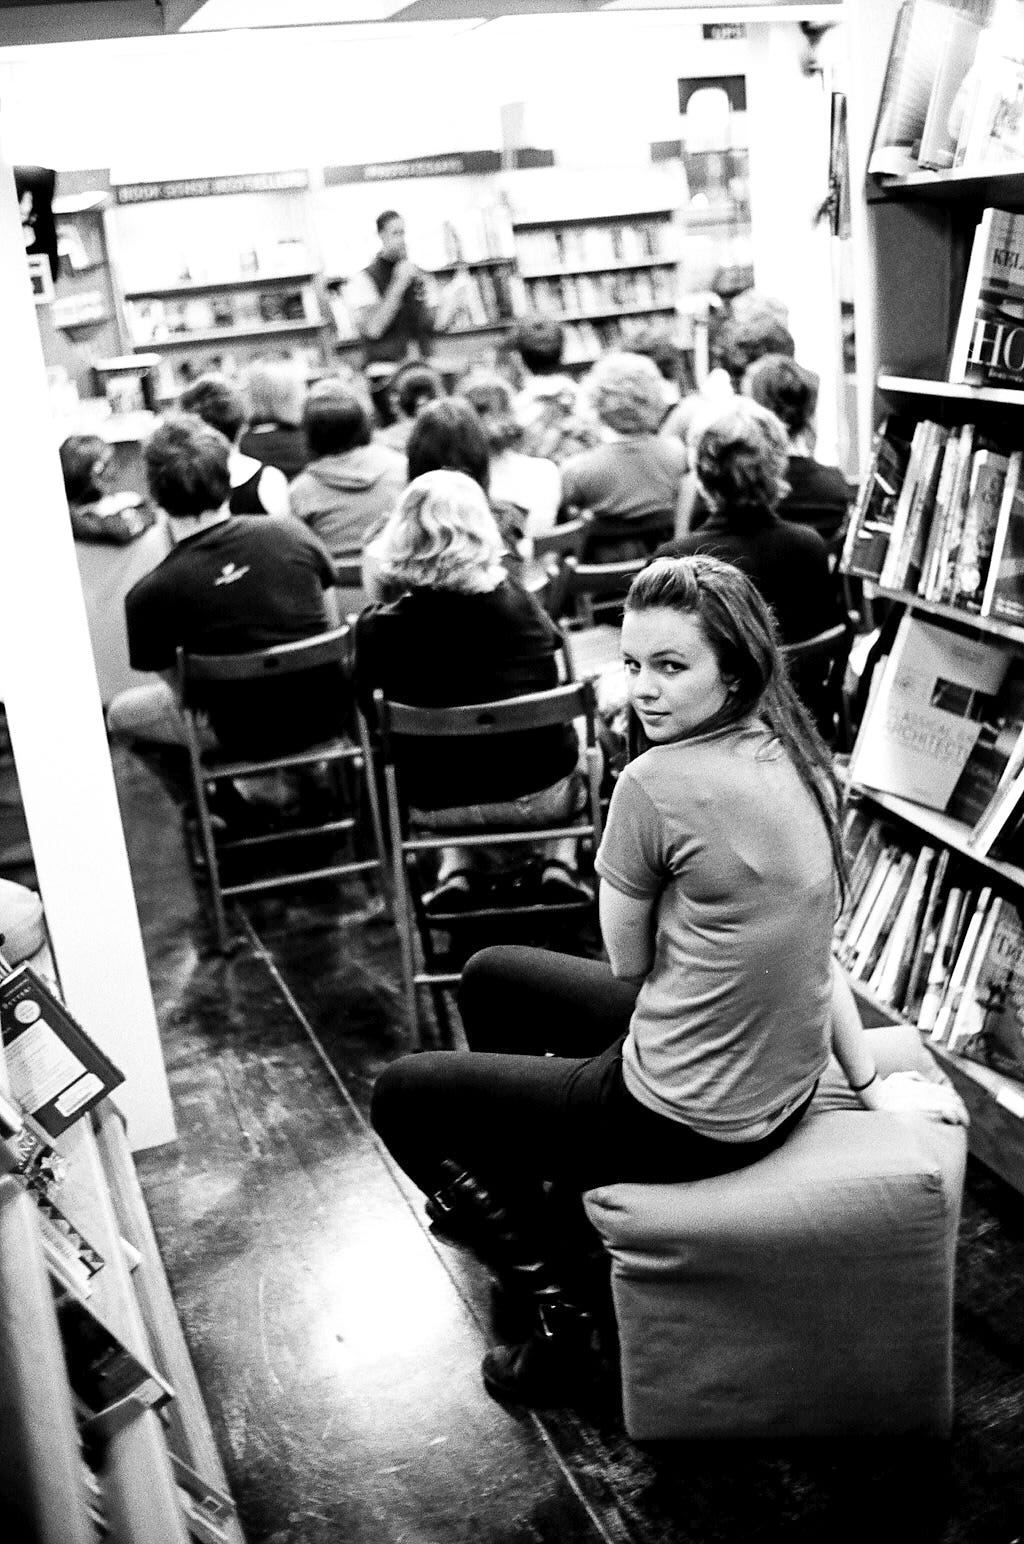 A poetry reading at a bookstore. In the foreground, Amber sits on a stool in the back of the audience. She turns her head to look at the camera behind her. In the background, slightly out of focus, is the audience watching Derrick perform. 